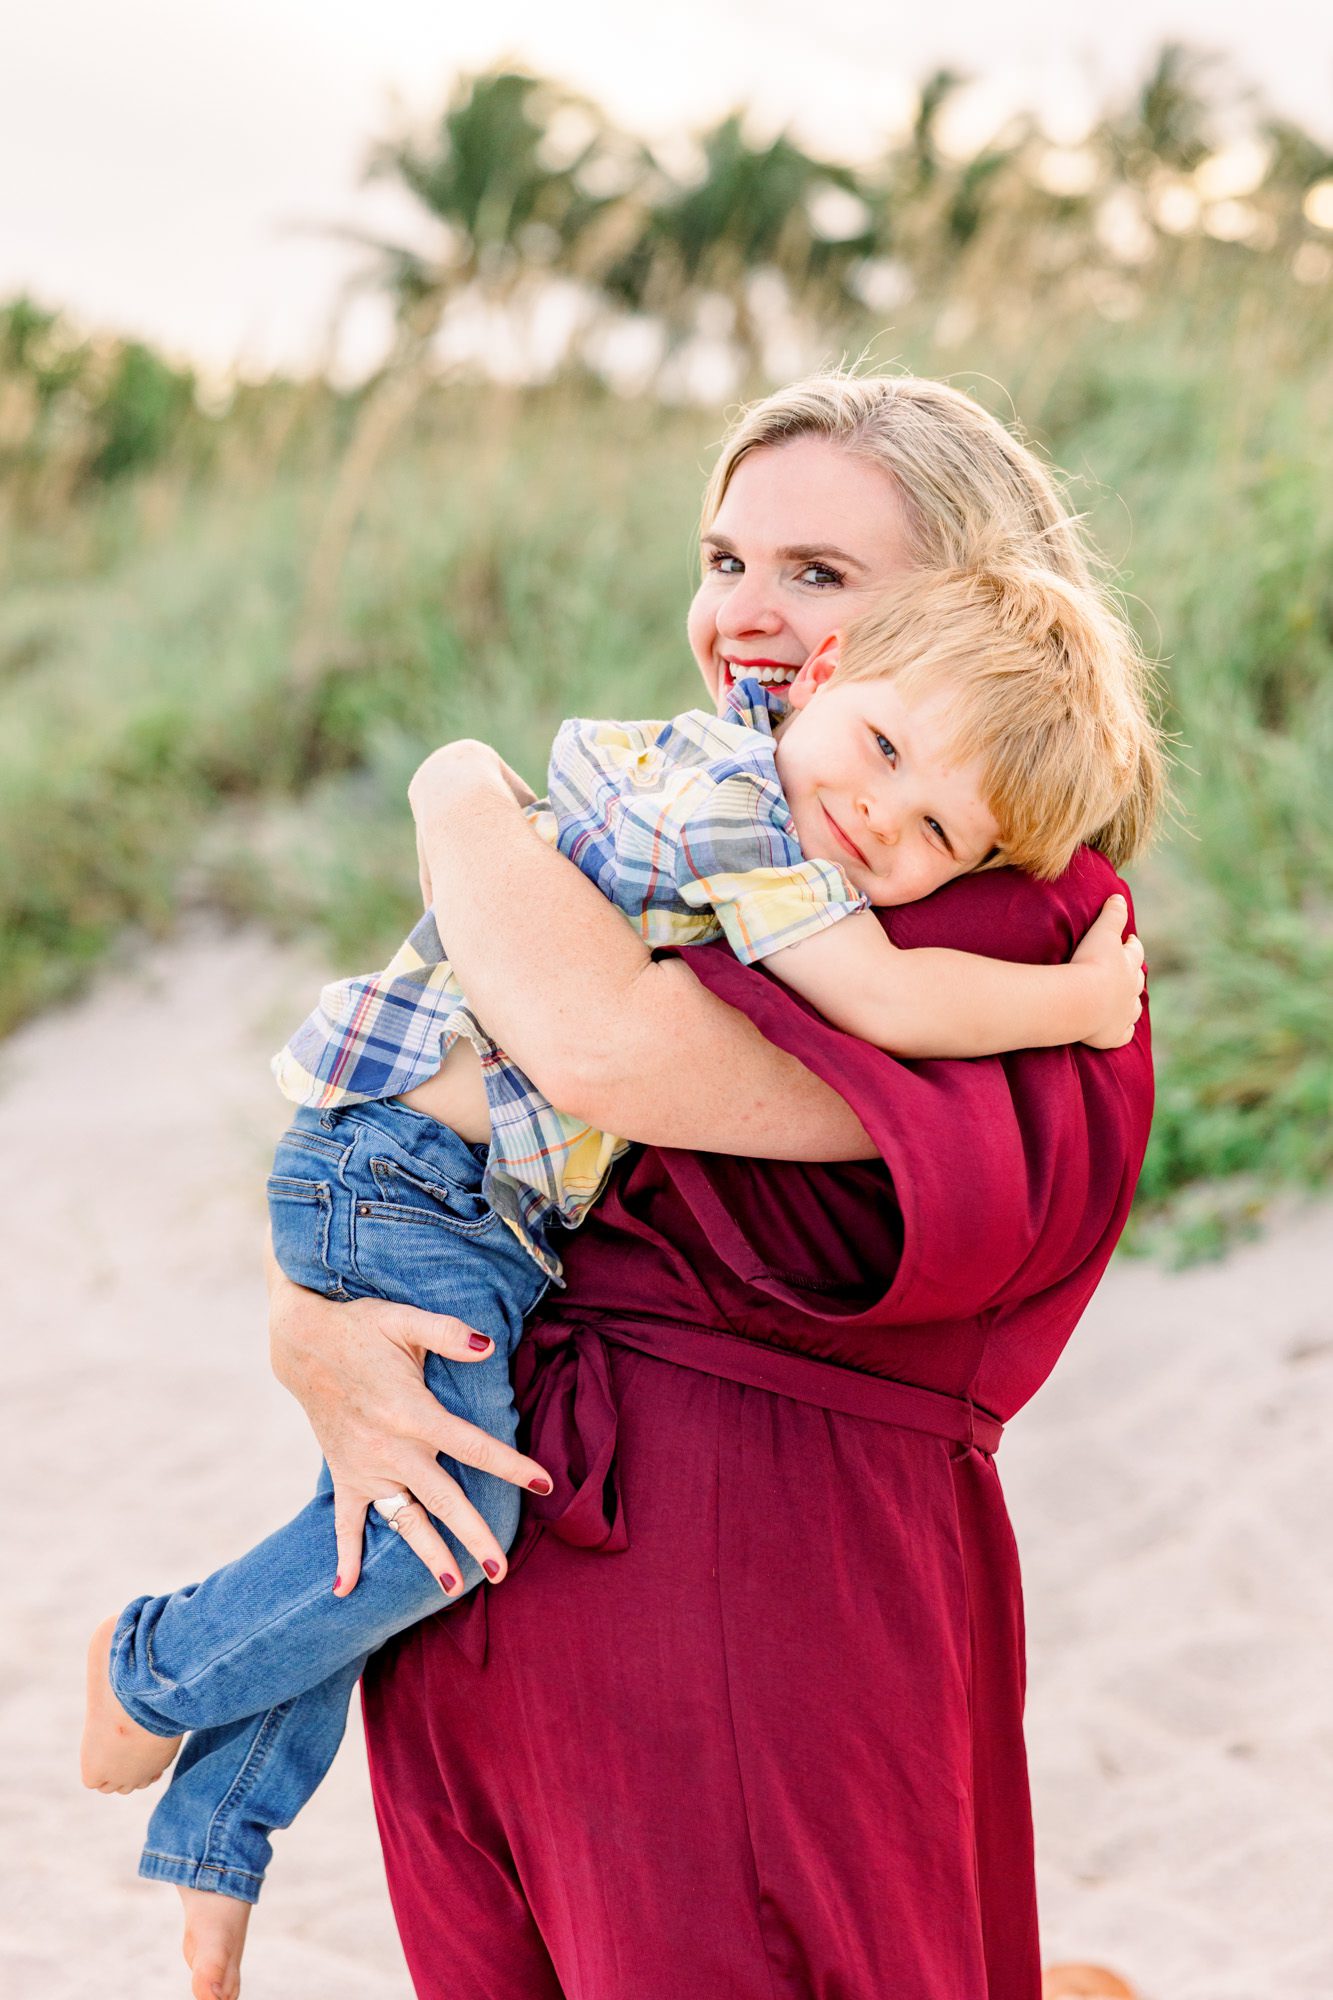 Mom in red dress hugging young son